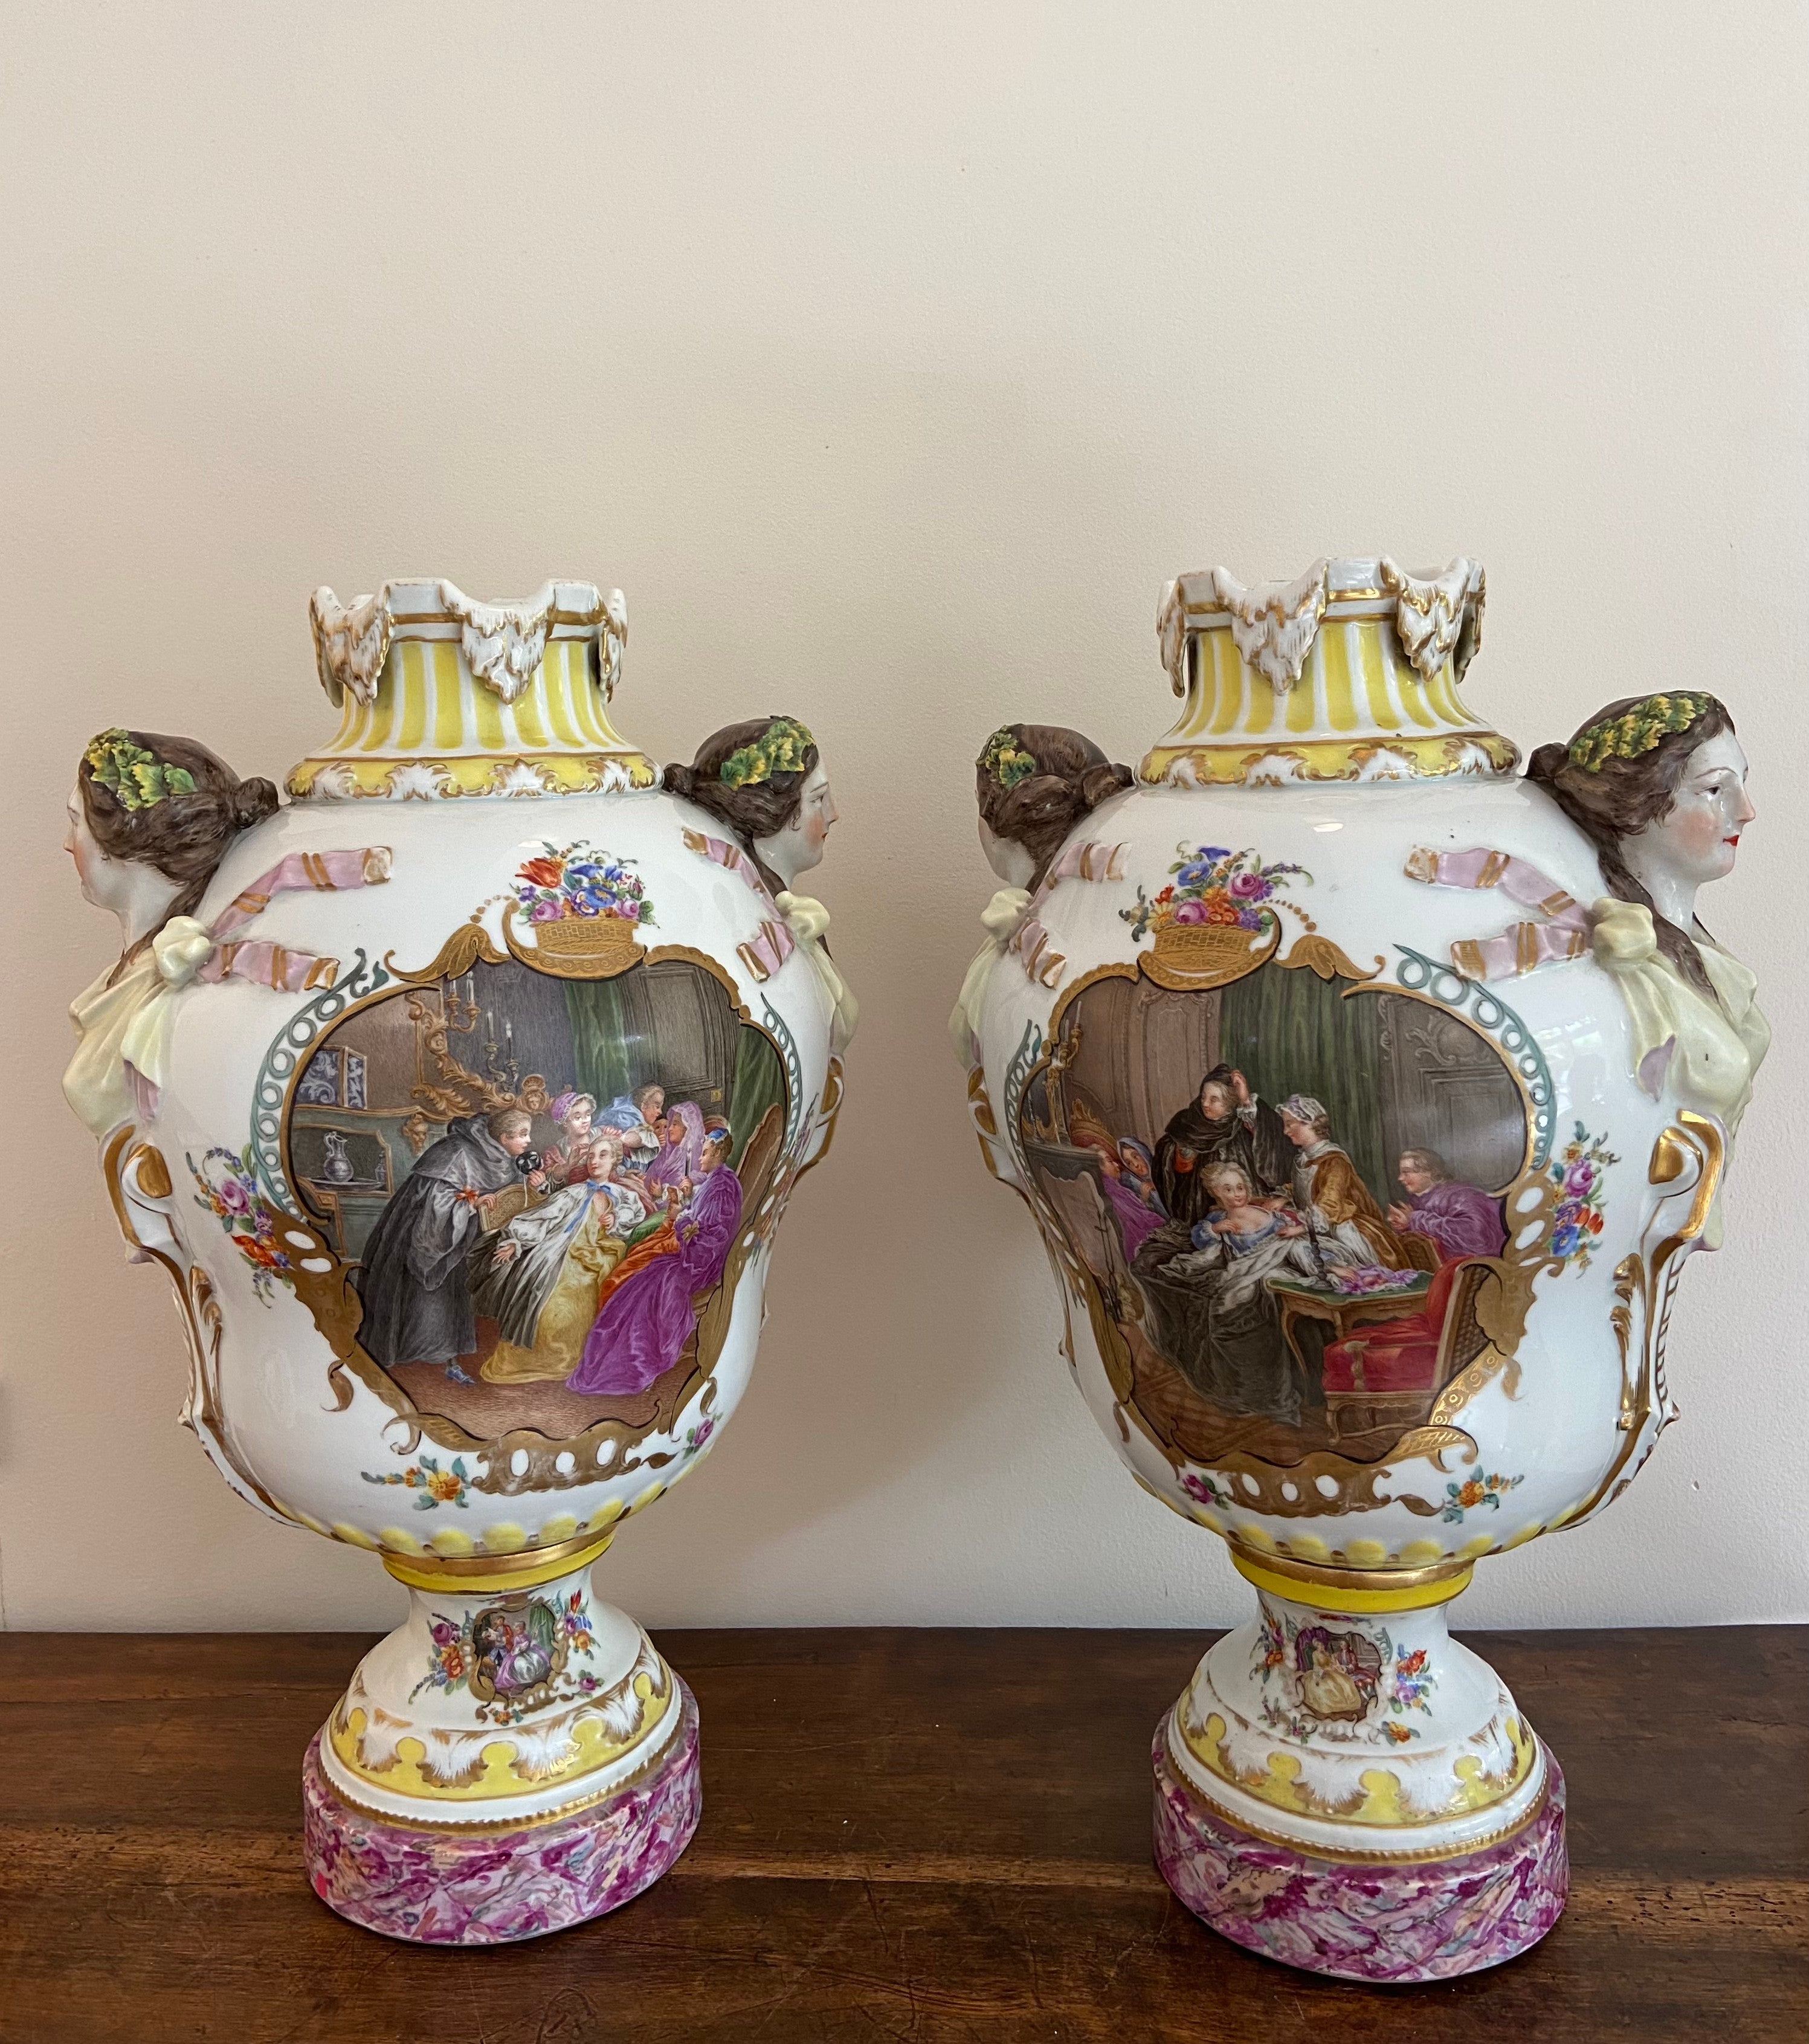 This pair of important and very beautiful vases is made of ceramic with 2 female faces and beautiful and fine decors. These vases were made for Meissen manufacture by Augustus Rex (and they are signed).